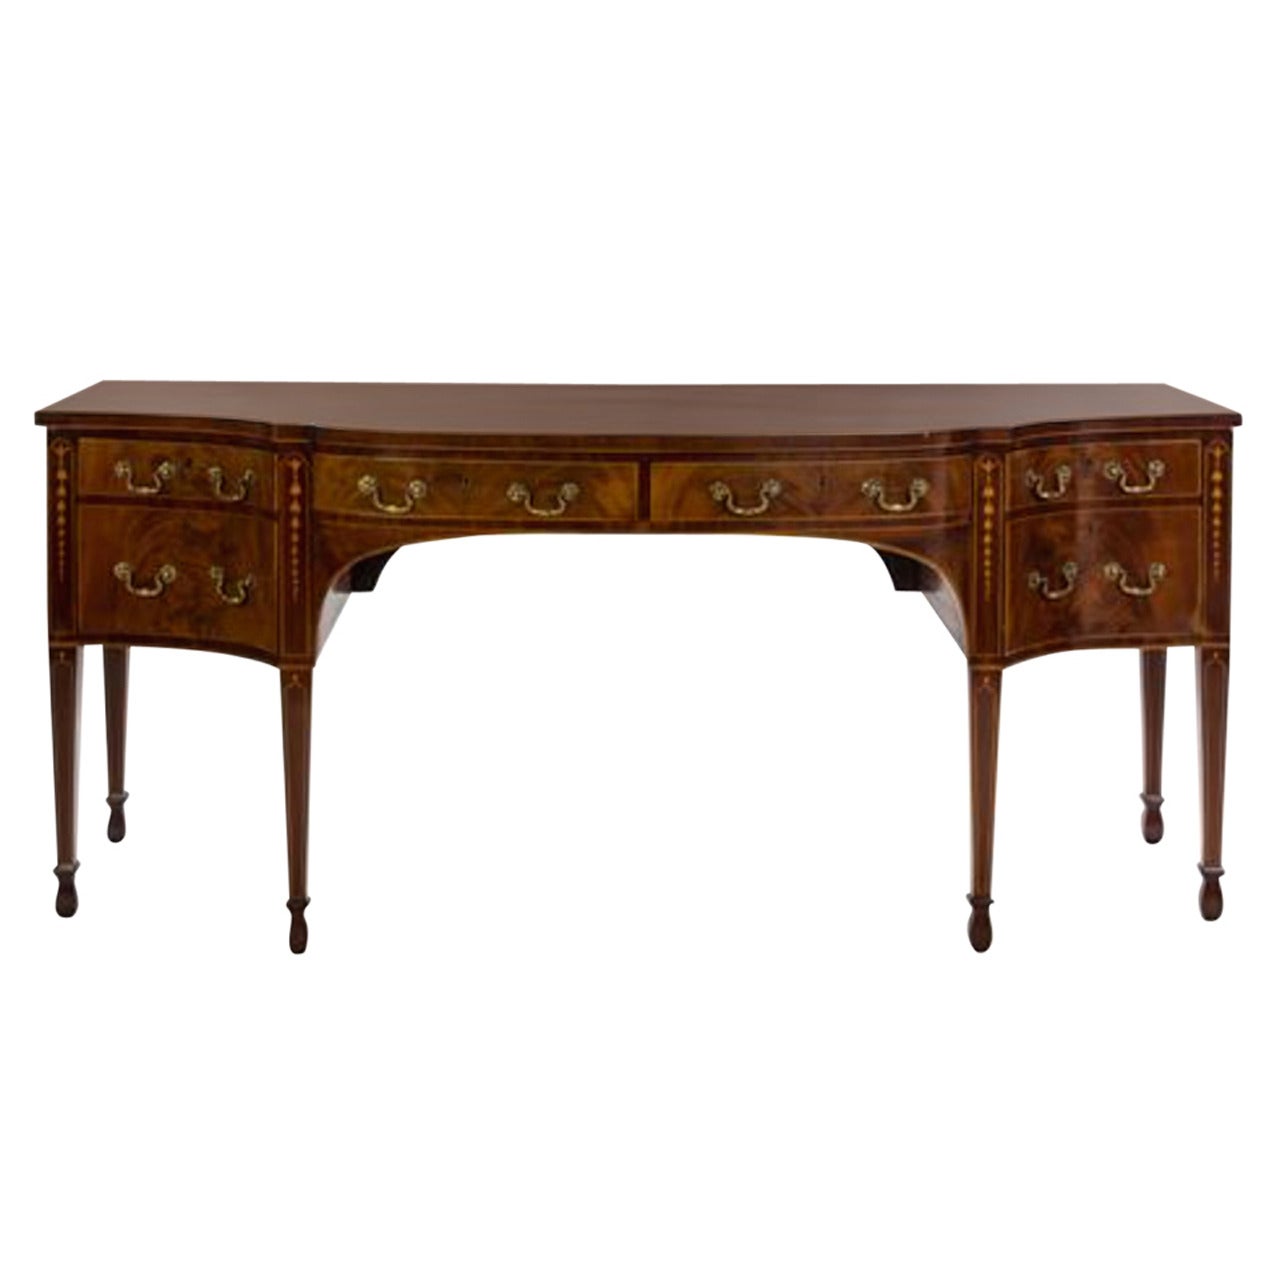 George III Mahogany and Satinwood Inlaid Sideboard.  Great Scale And Color.